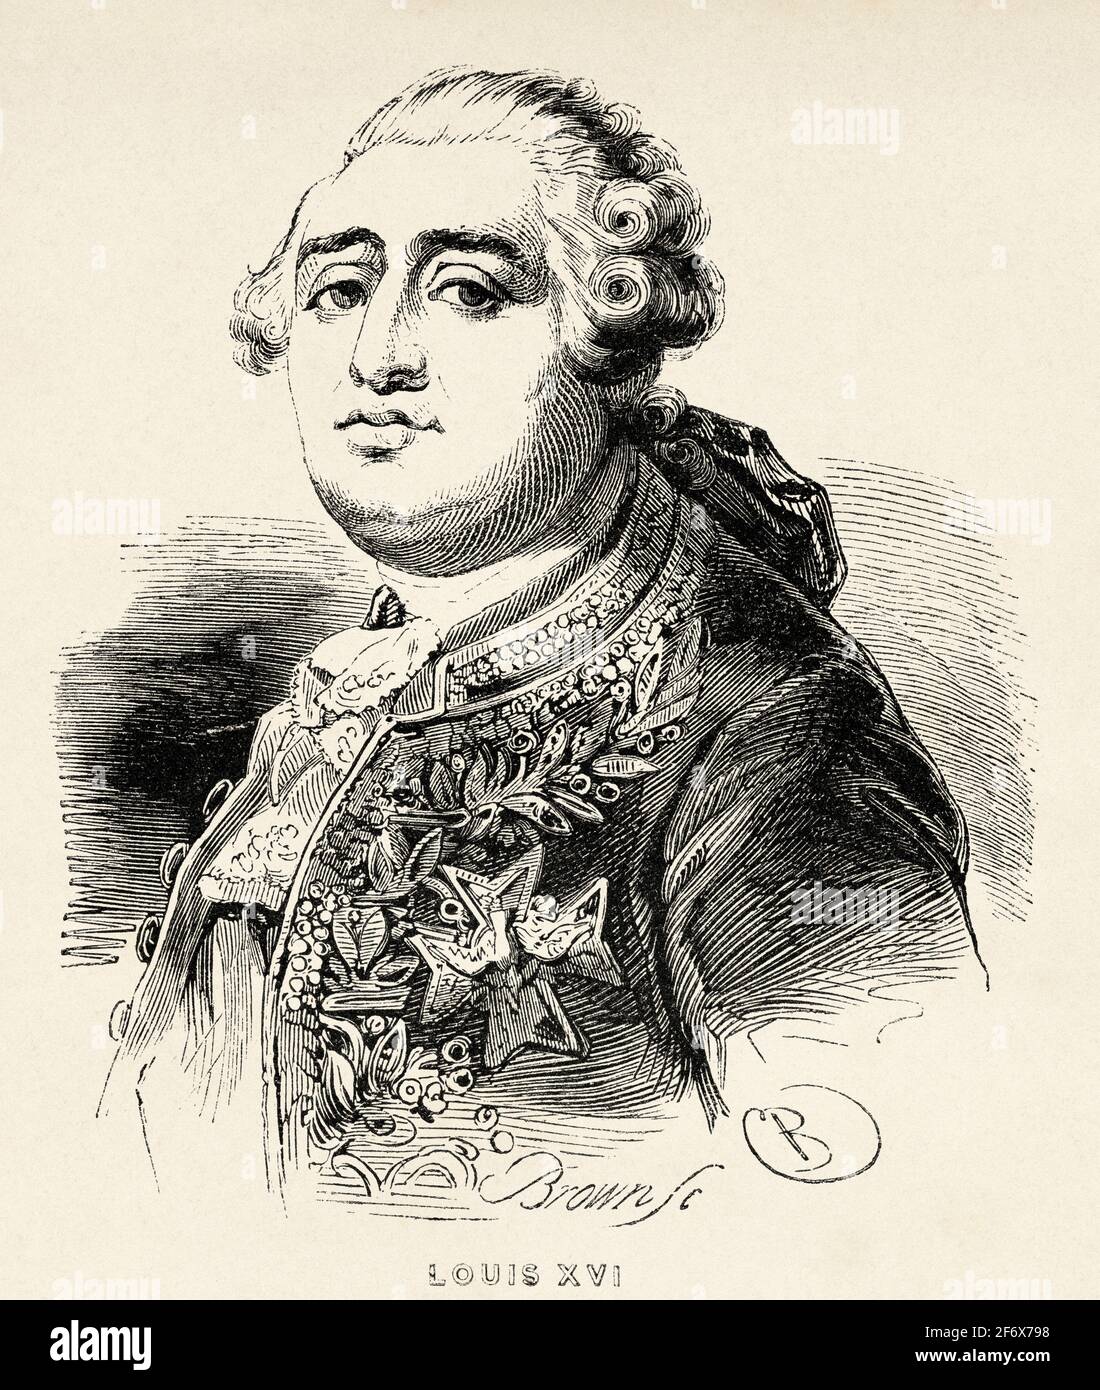 Portrait of Louis XVI the Restorer of the French Liberty (1754-1793) King of France from 1774 to 1793. House of Bourbon. France, French Revolution 18th century. Old engraved illustration from Histoire de la Revolution Francaise 1845 Stock Photo